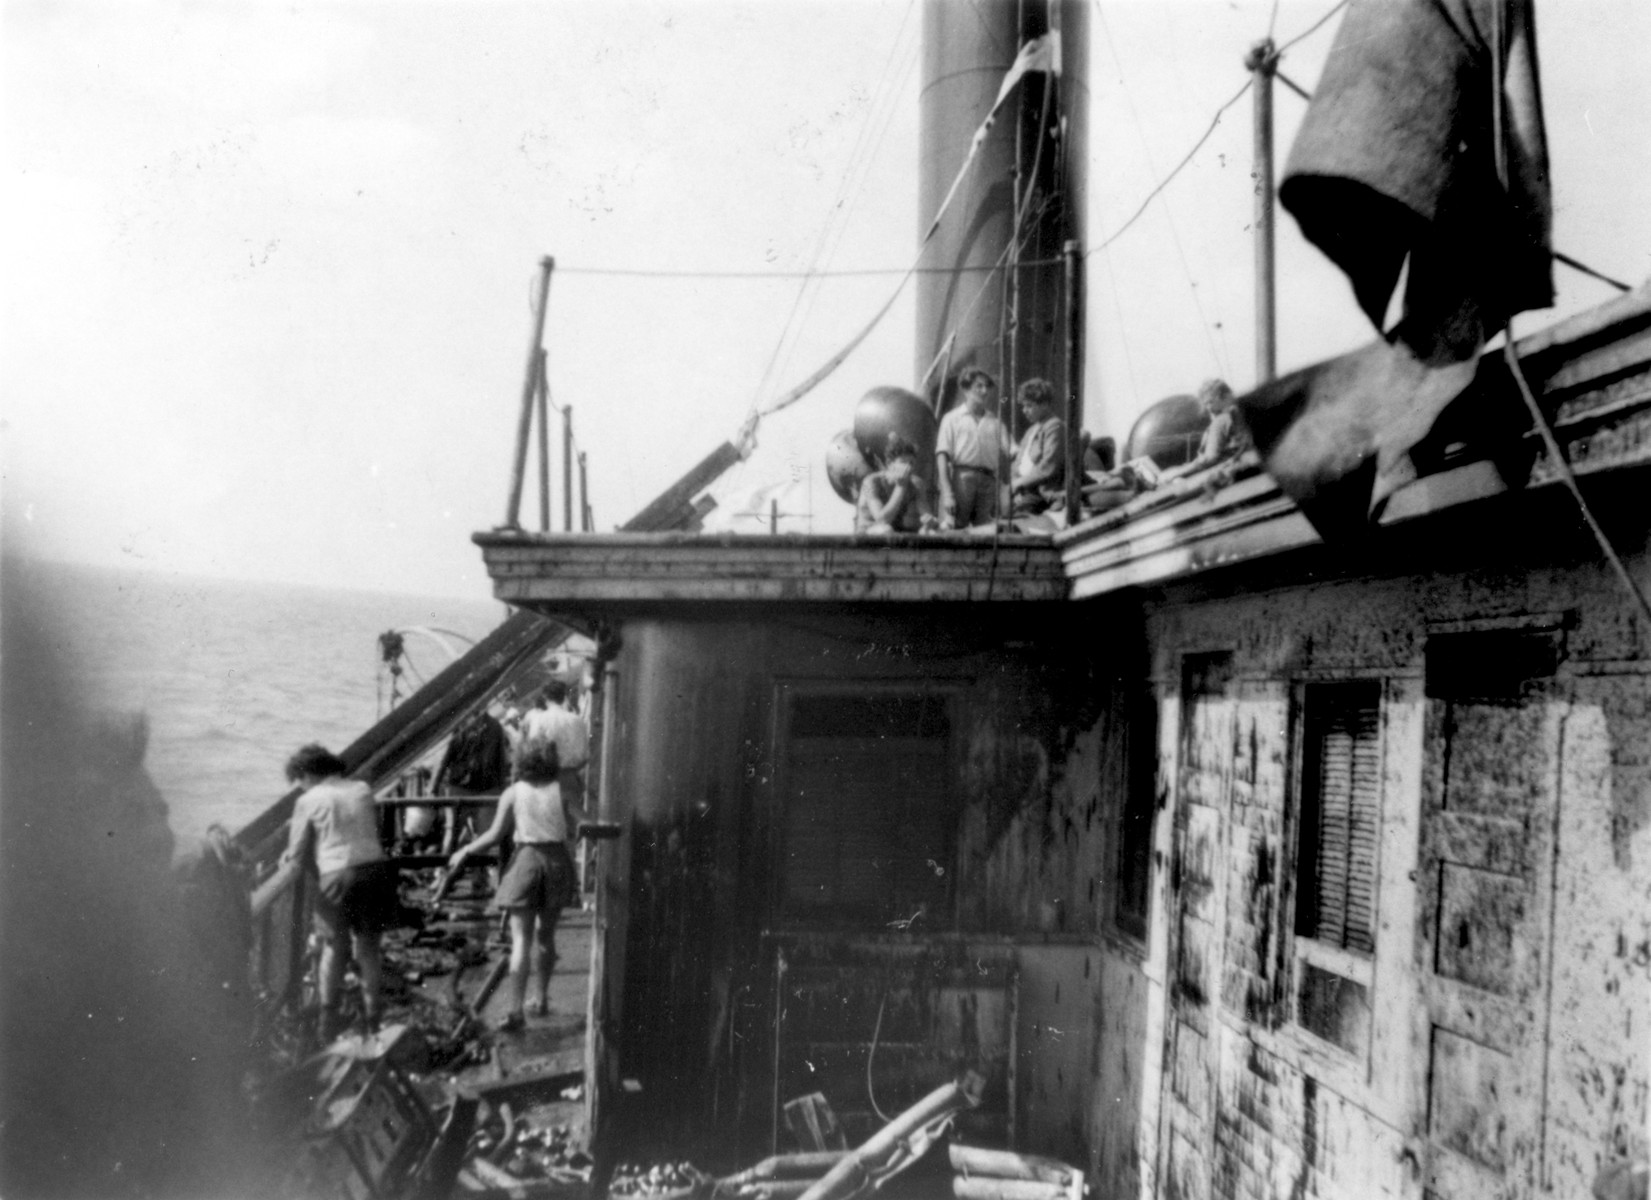 Exodus 1947 passengers survey the damage the morning after the battle with the British boarding party.